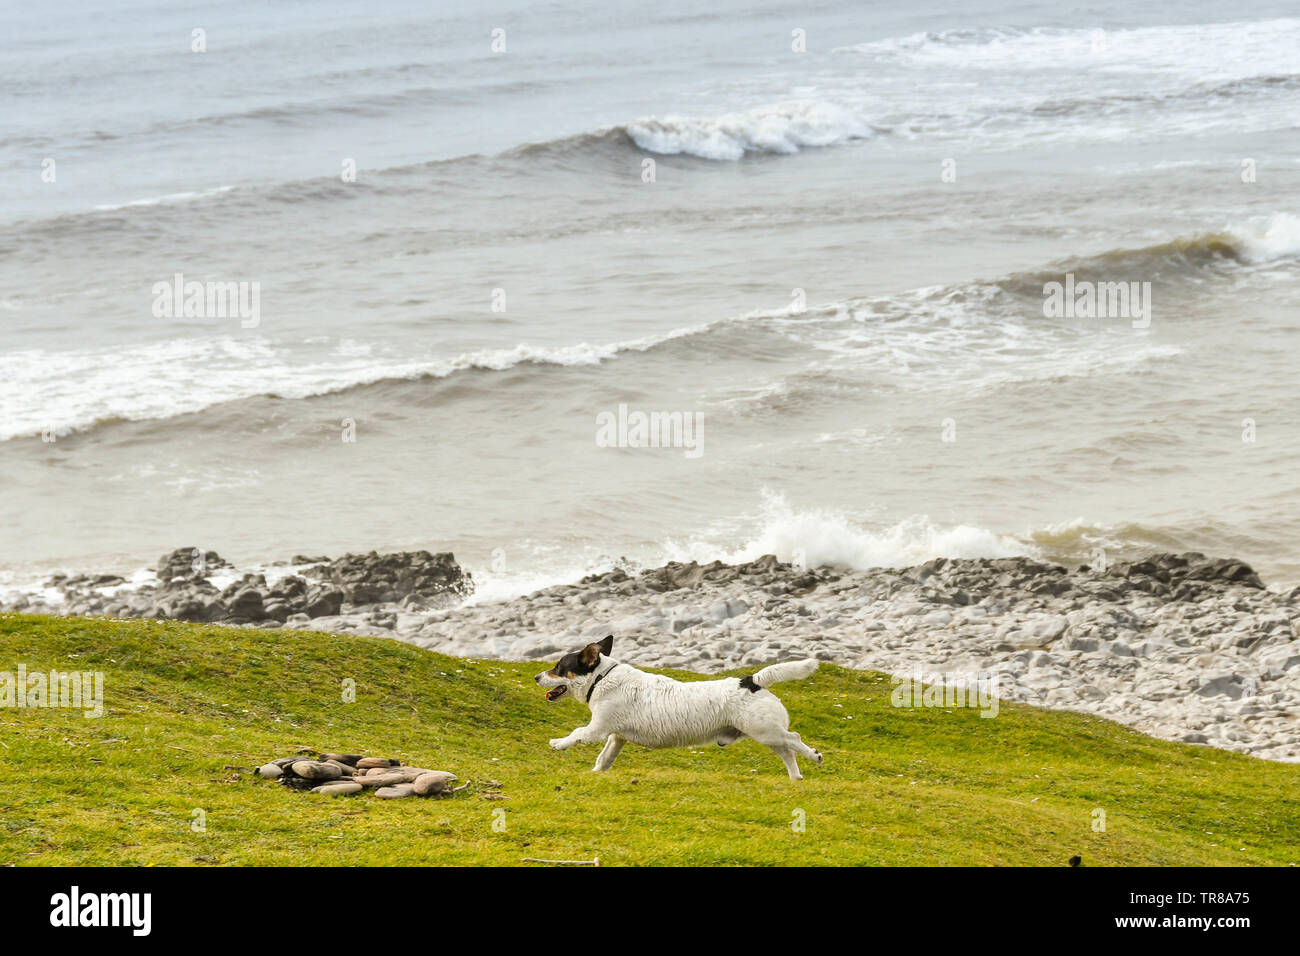 OGMORE BY SEA, WALES - APRIL 2019: Small dog running free on a cliff top with sea in the background in Ogmore by Sea in South Wales. Stock Photo